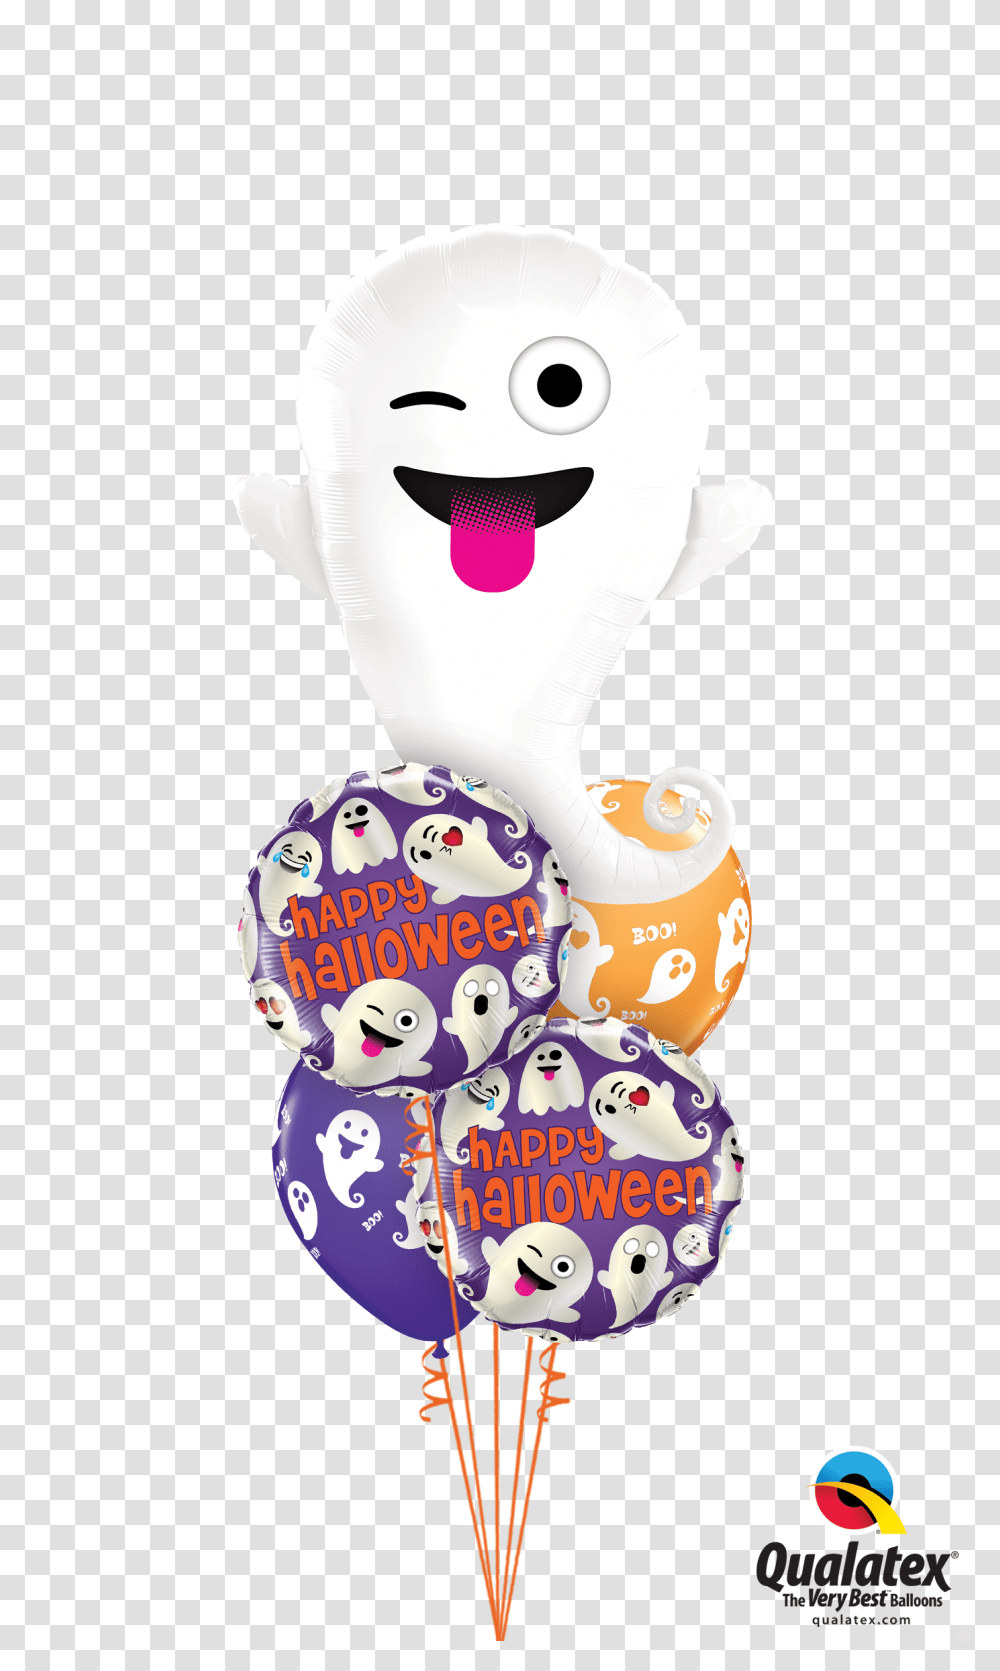 Party Spirit Halloween Balloon Bouquet Party Fever Party Fever, Performer, Snowman, Crowd, Leisure Activities Transparent Png